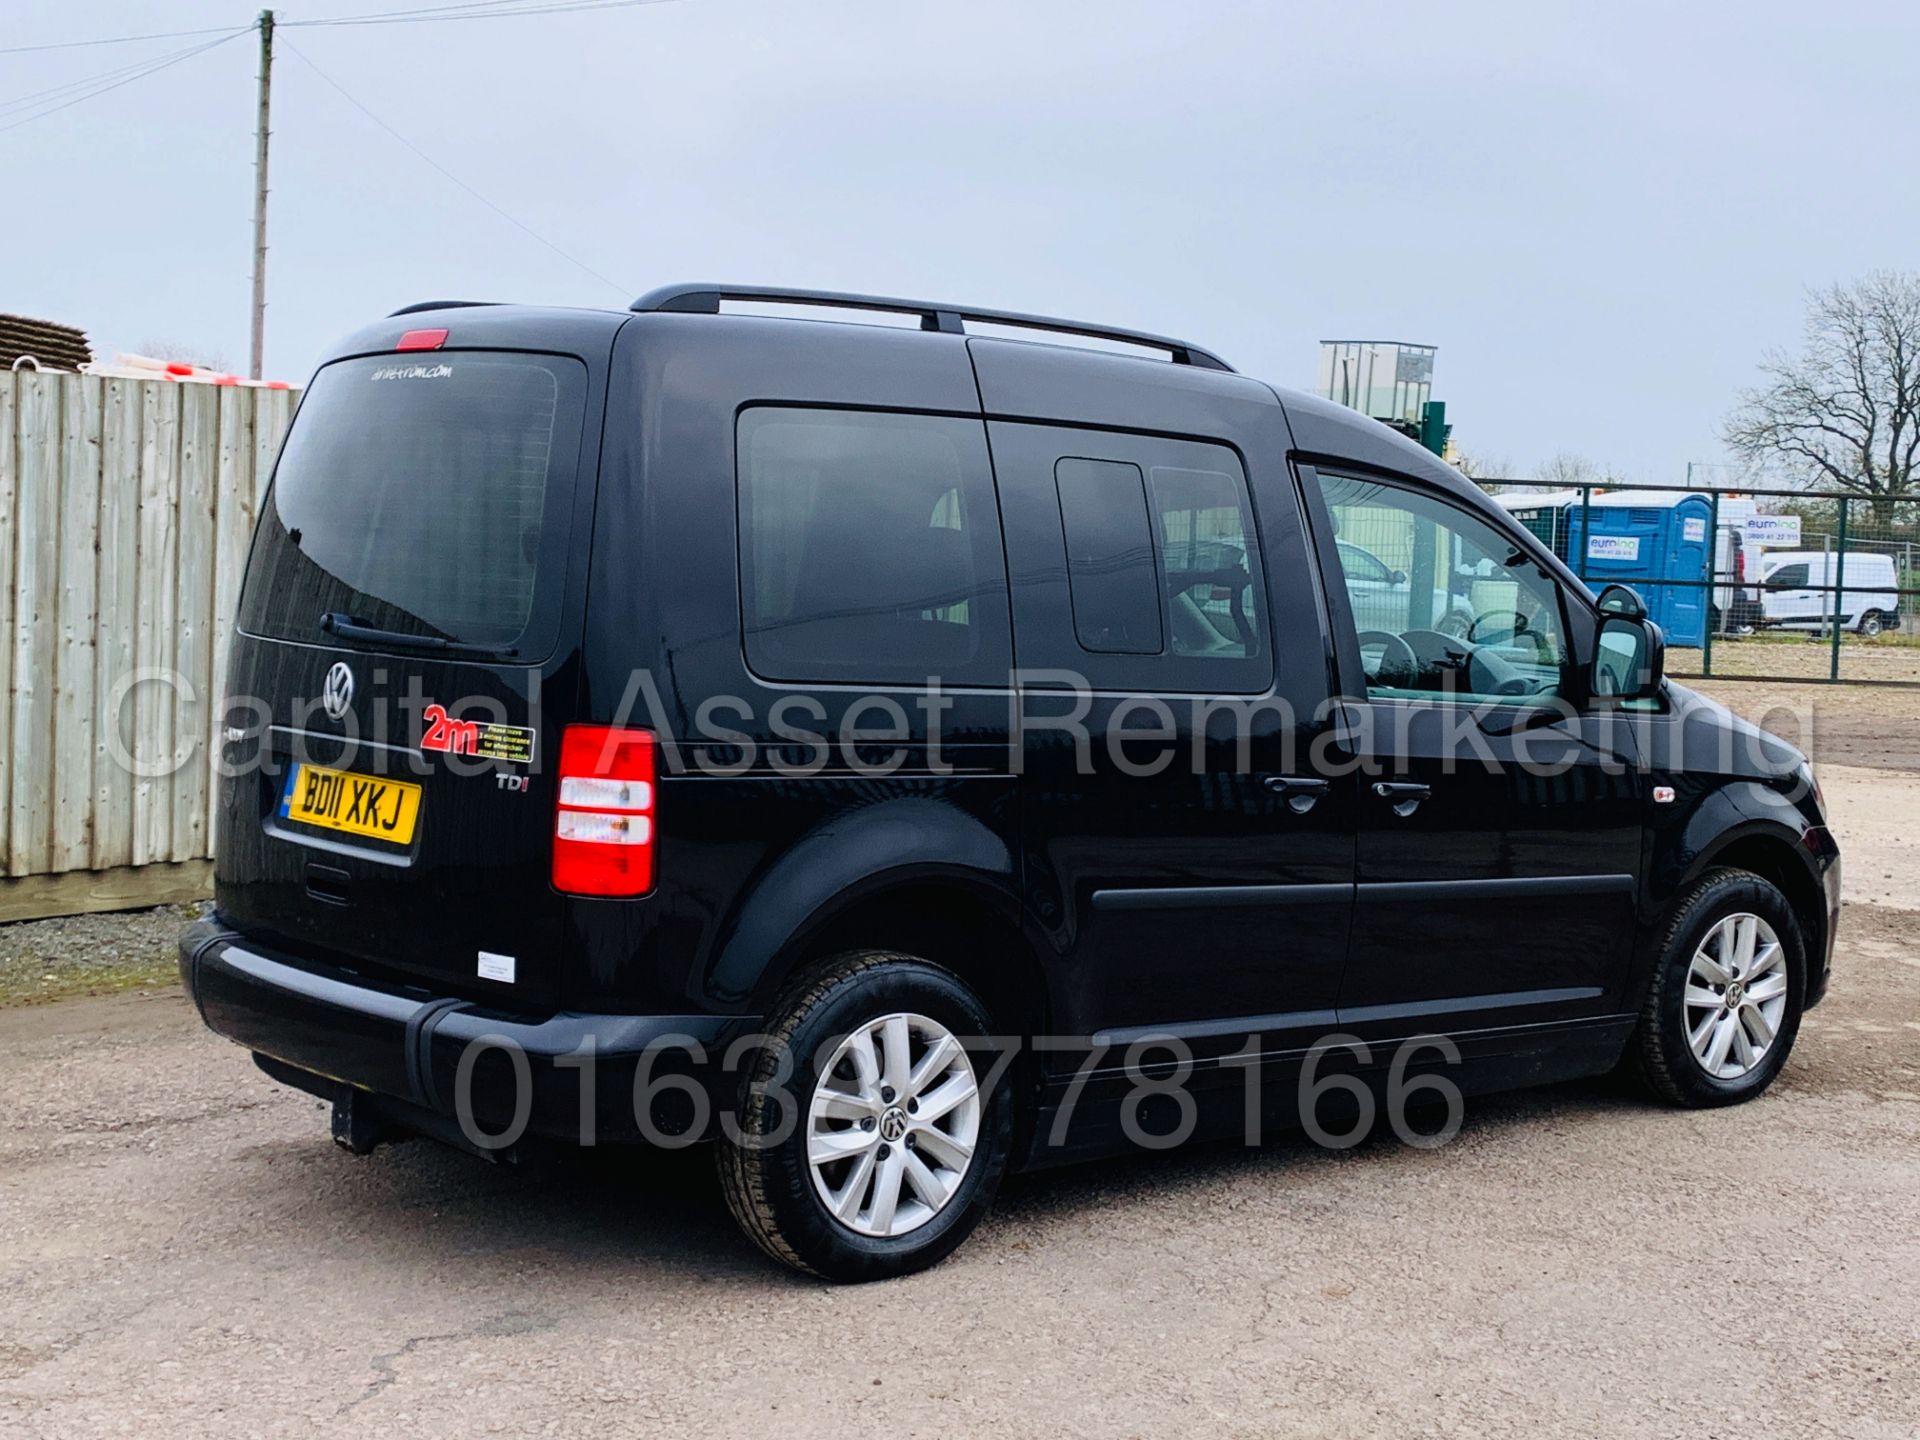 VOLKSWAGEN CADDY C20 *LIFE* DISABILITY ACCESS /WAV (2011) '1.6 TDI - AUTO' *A/C* (35,000 MILES ONLY) - Image 9 of 41